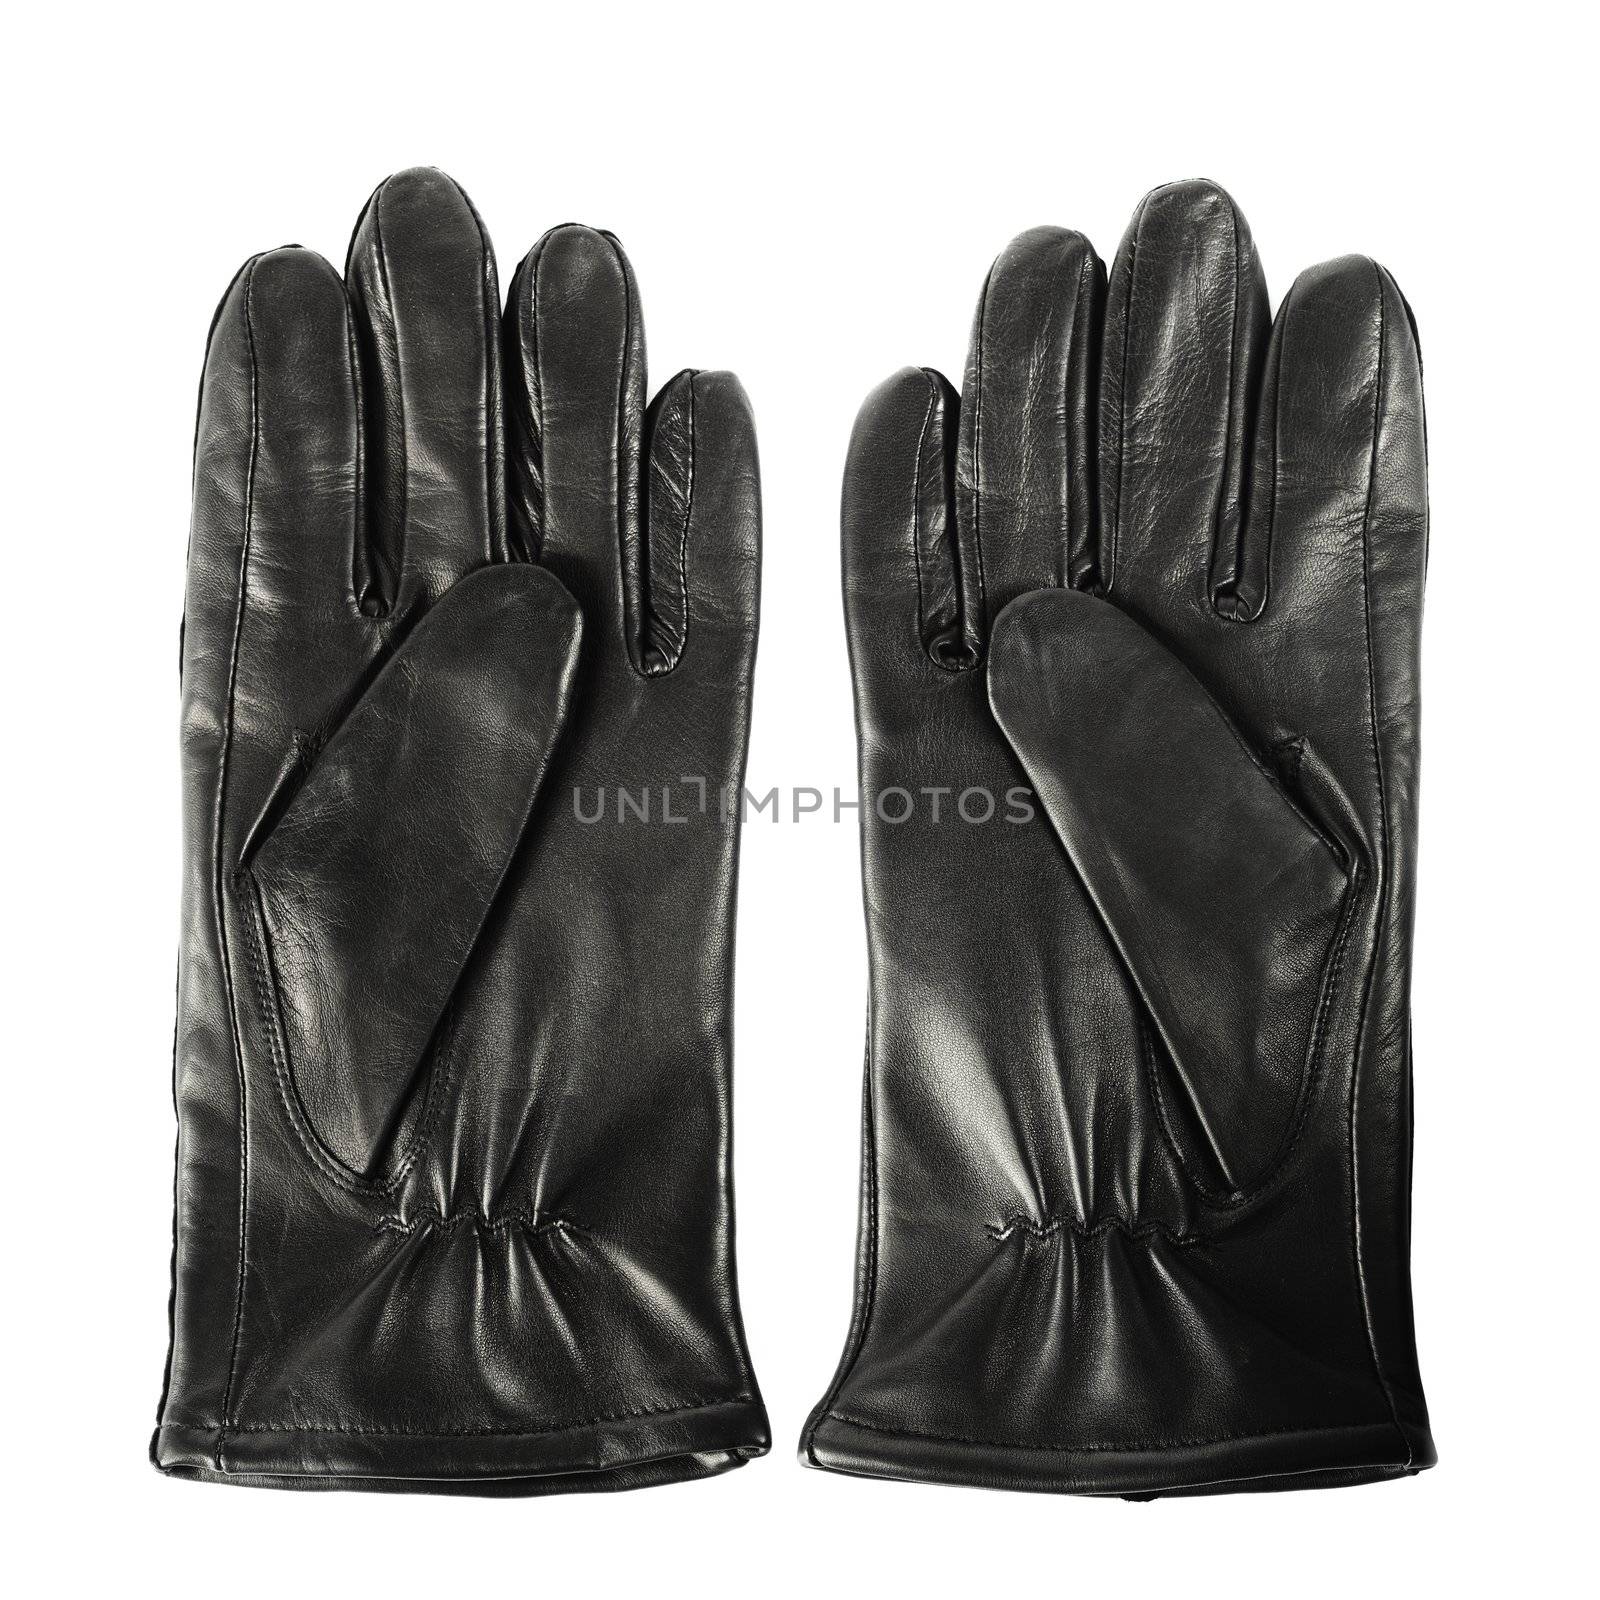 Pair of new mens black leather gloves isolated on white